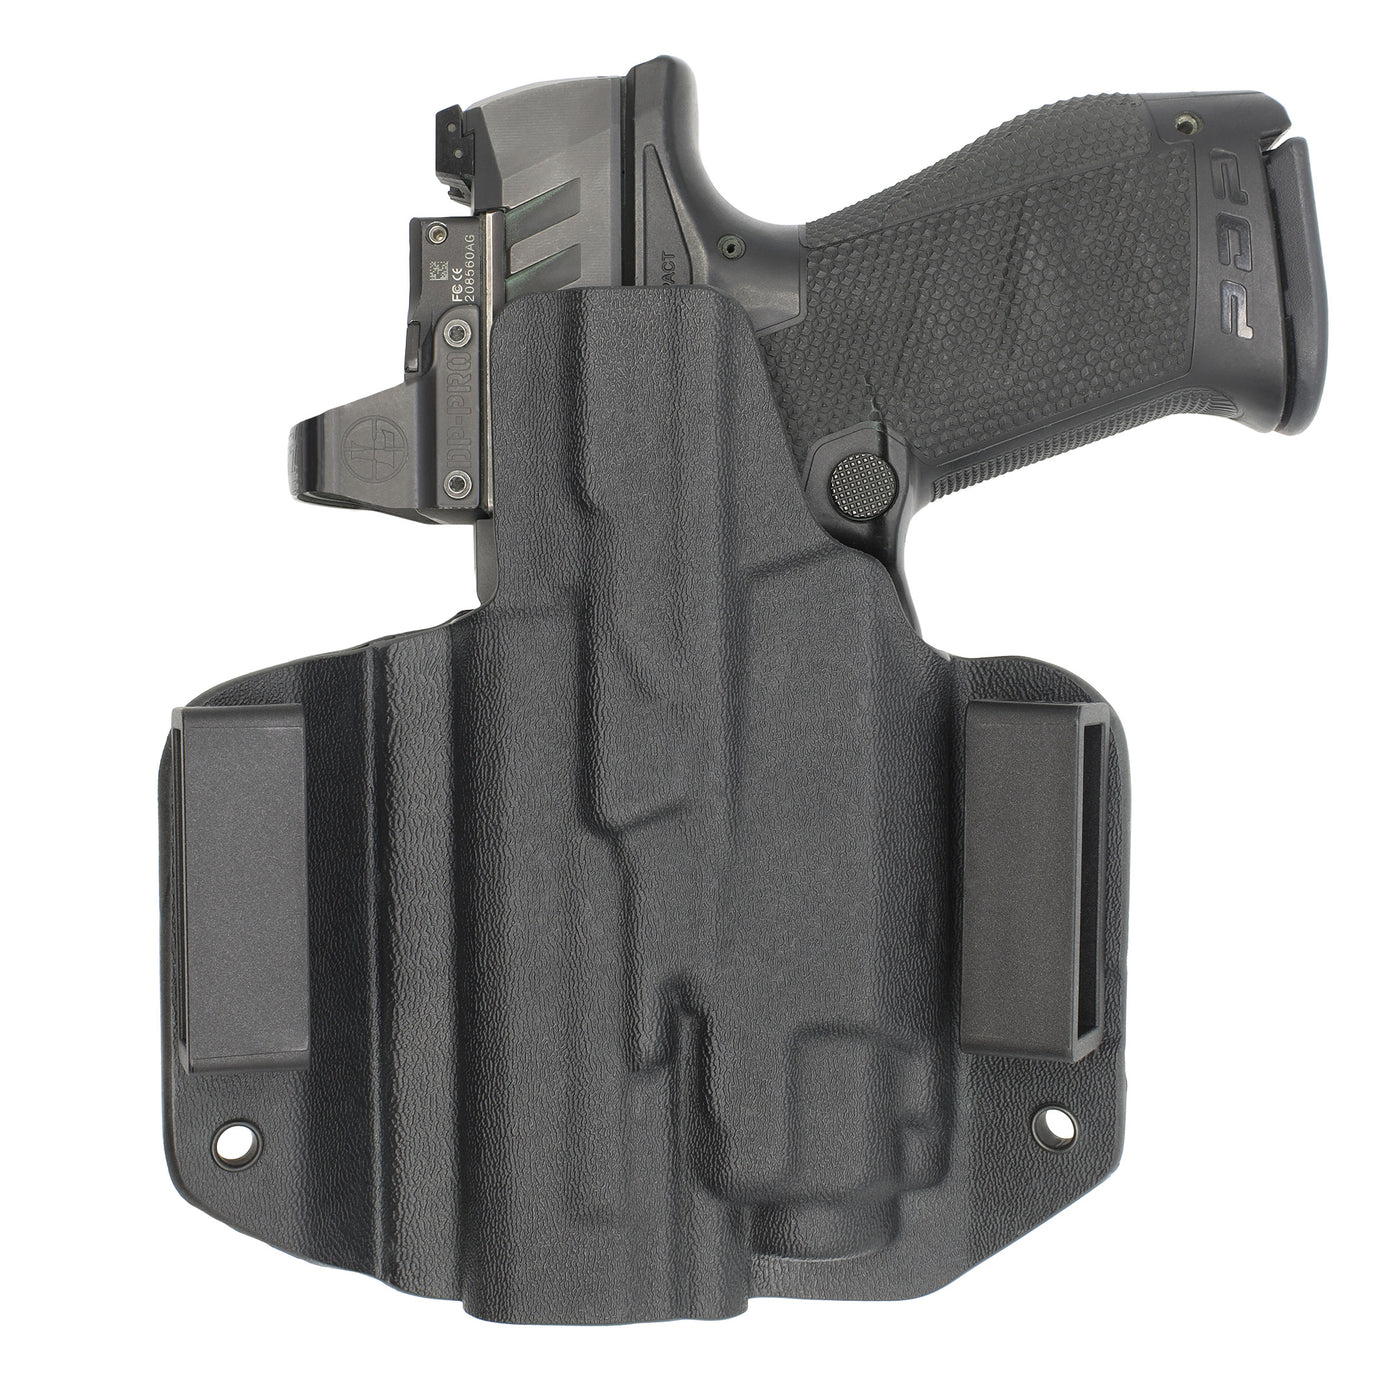 C&G Holsters Quickship OWB tactical Beretta streamlight TLR8 holstered back view